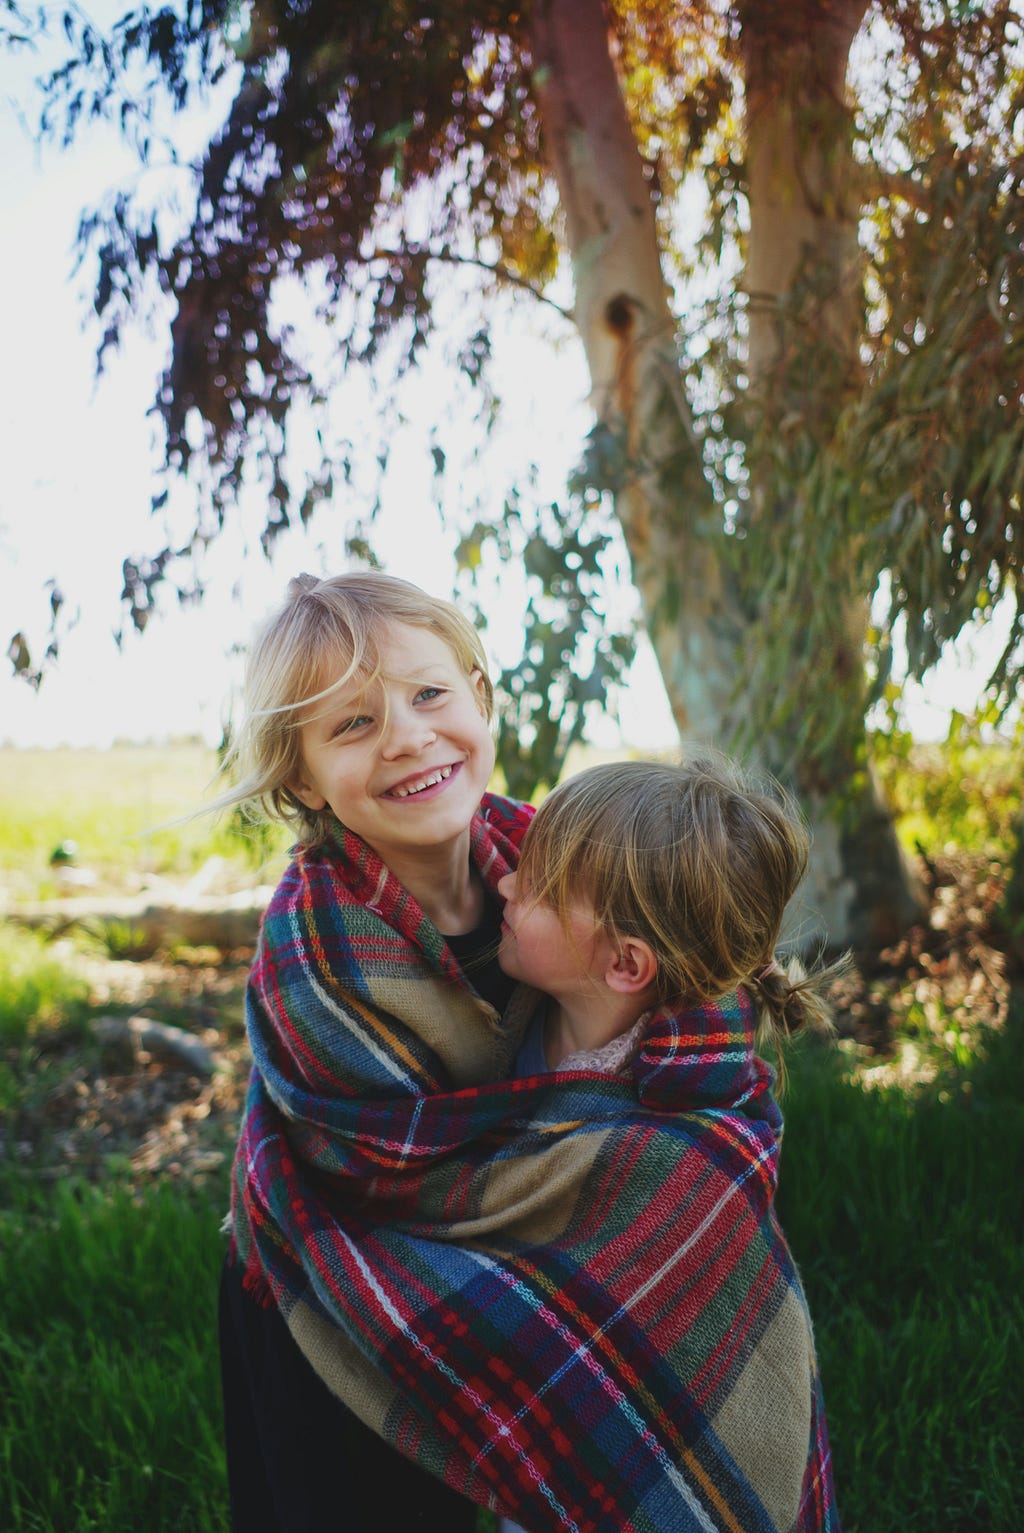 The image is of two smiling young girls, standing upright, wrapped in a blue, red, and green Scottish-checked blanket. The taller, a blond faces the camera, while the younger, shorter, dark ponytail faces her sister. They are outside. The tree in the background is a eucalyptus. It is a sunny day.